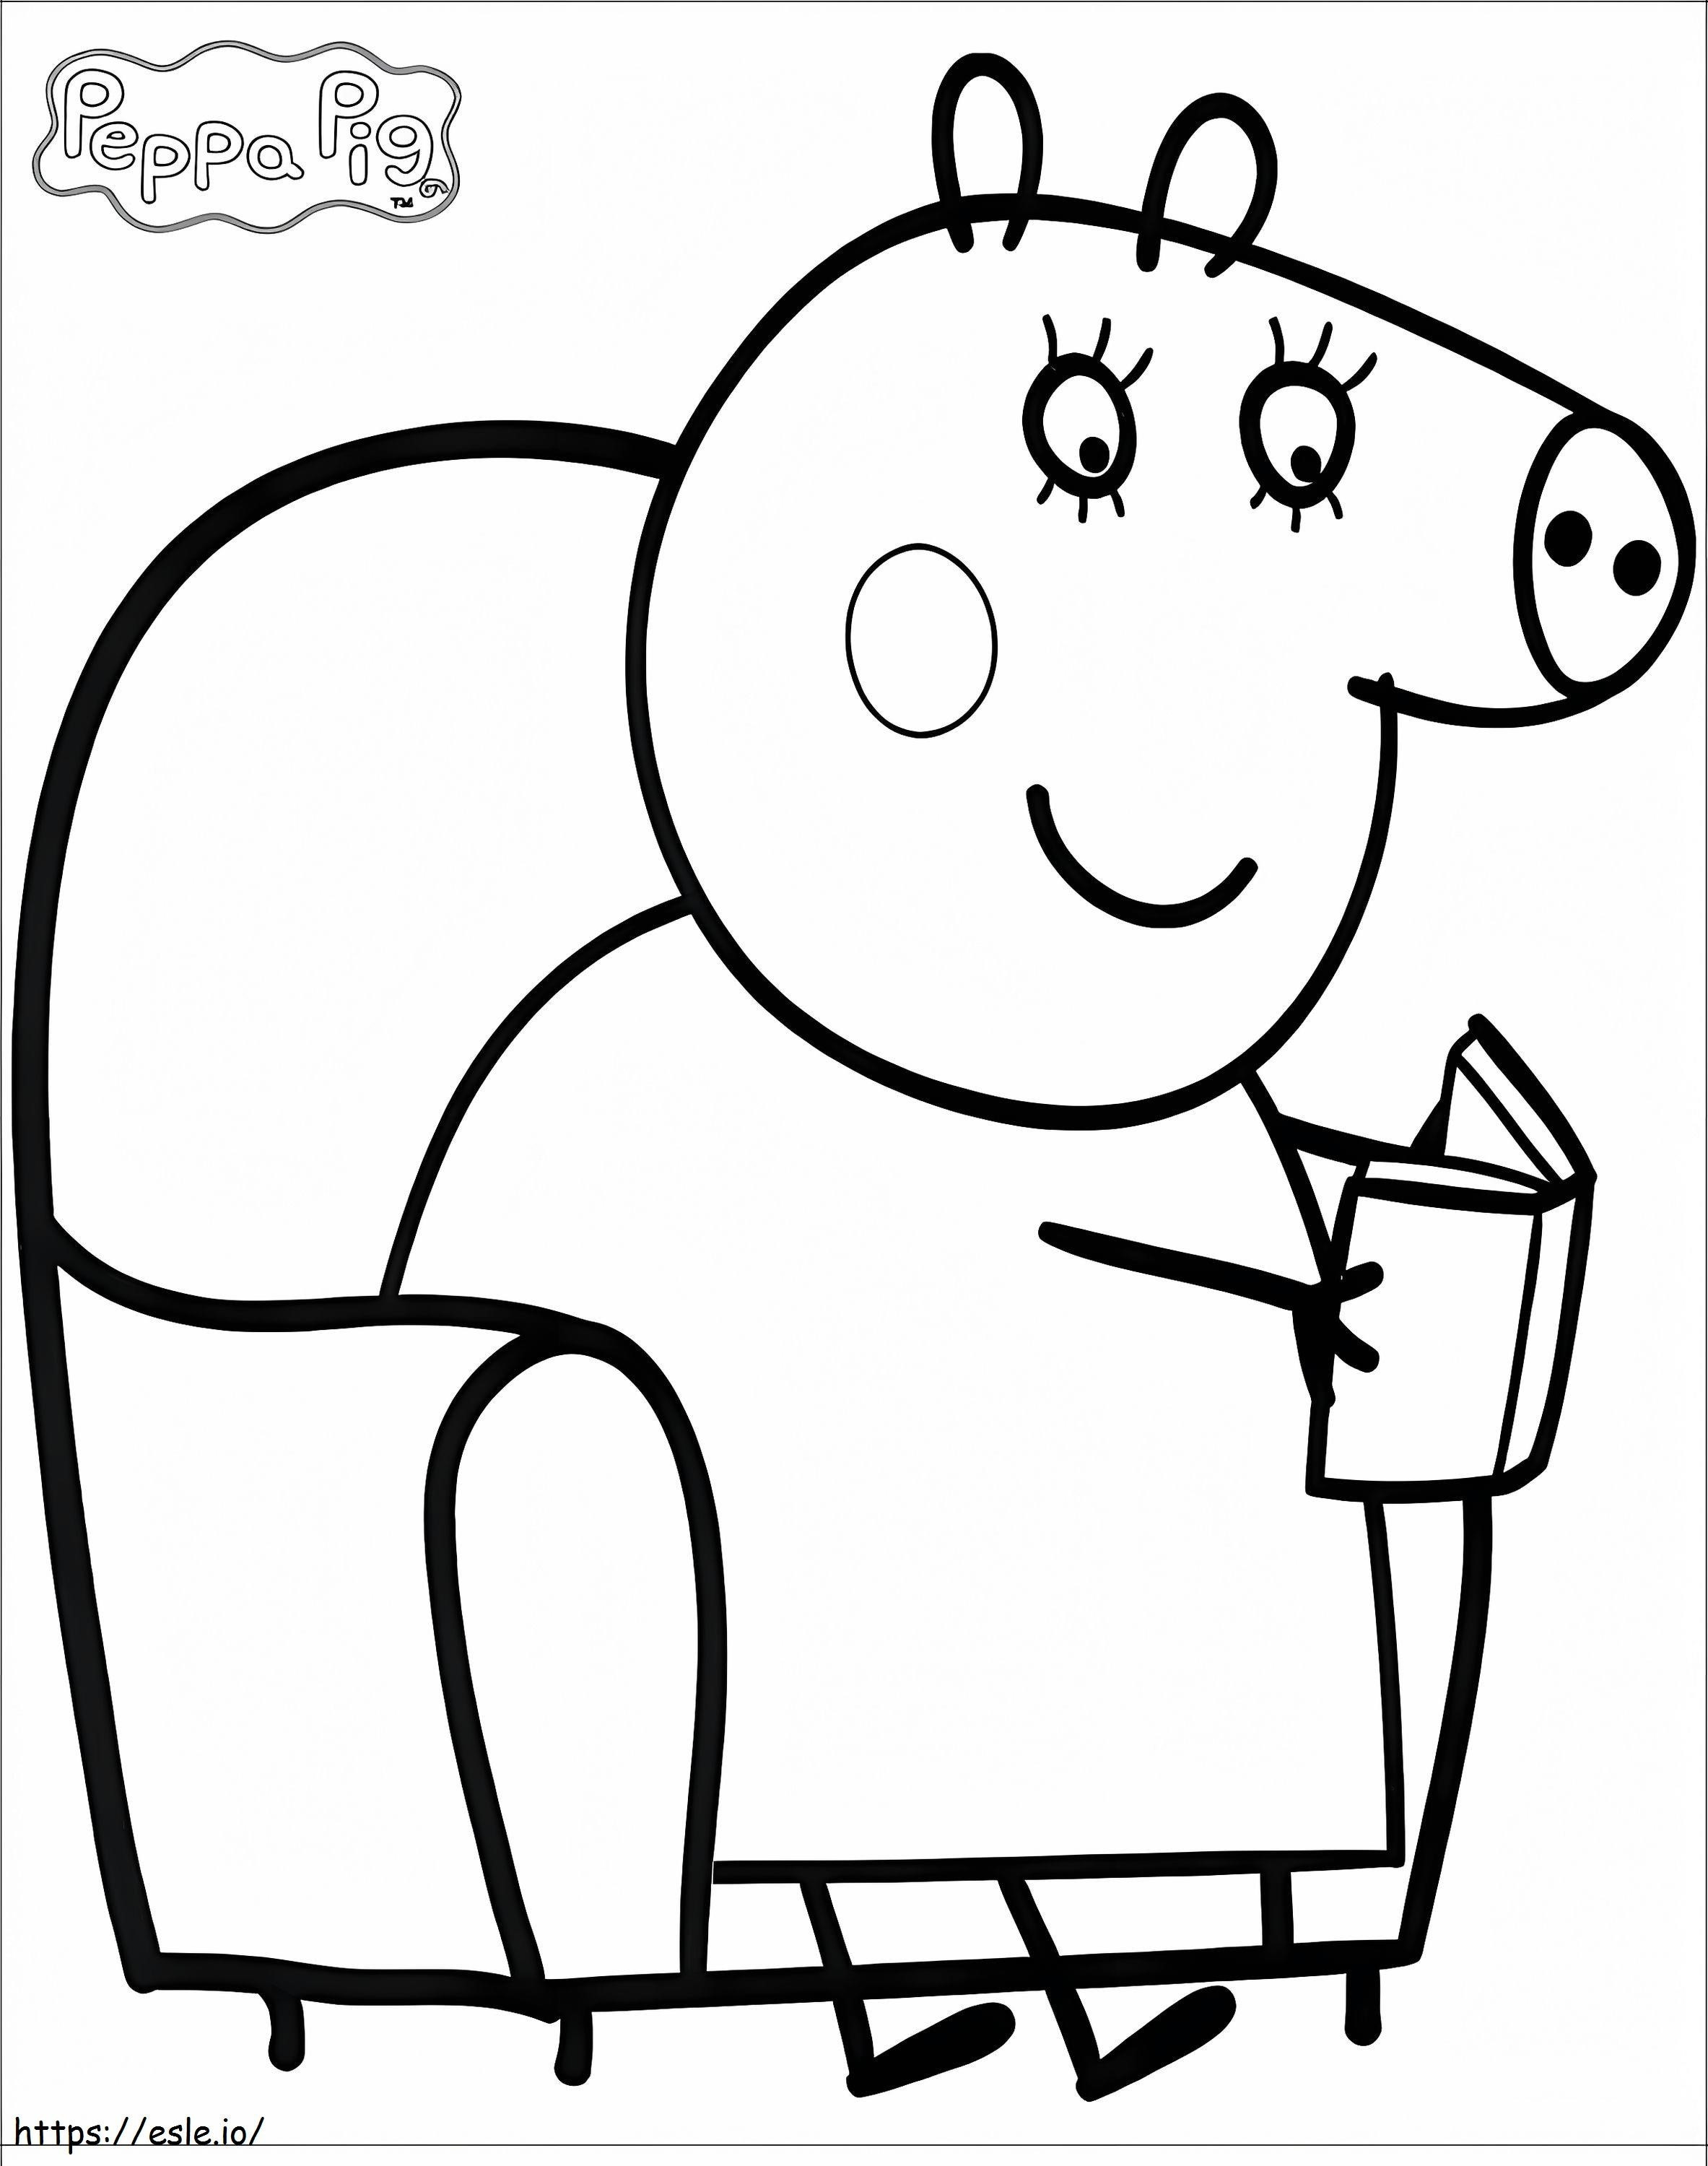 Mom Pig 2 coloring page